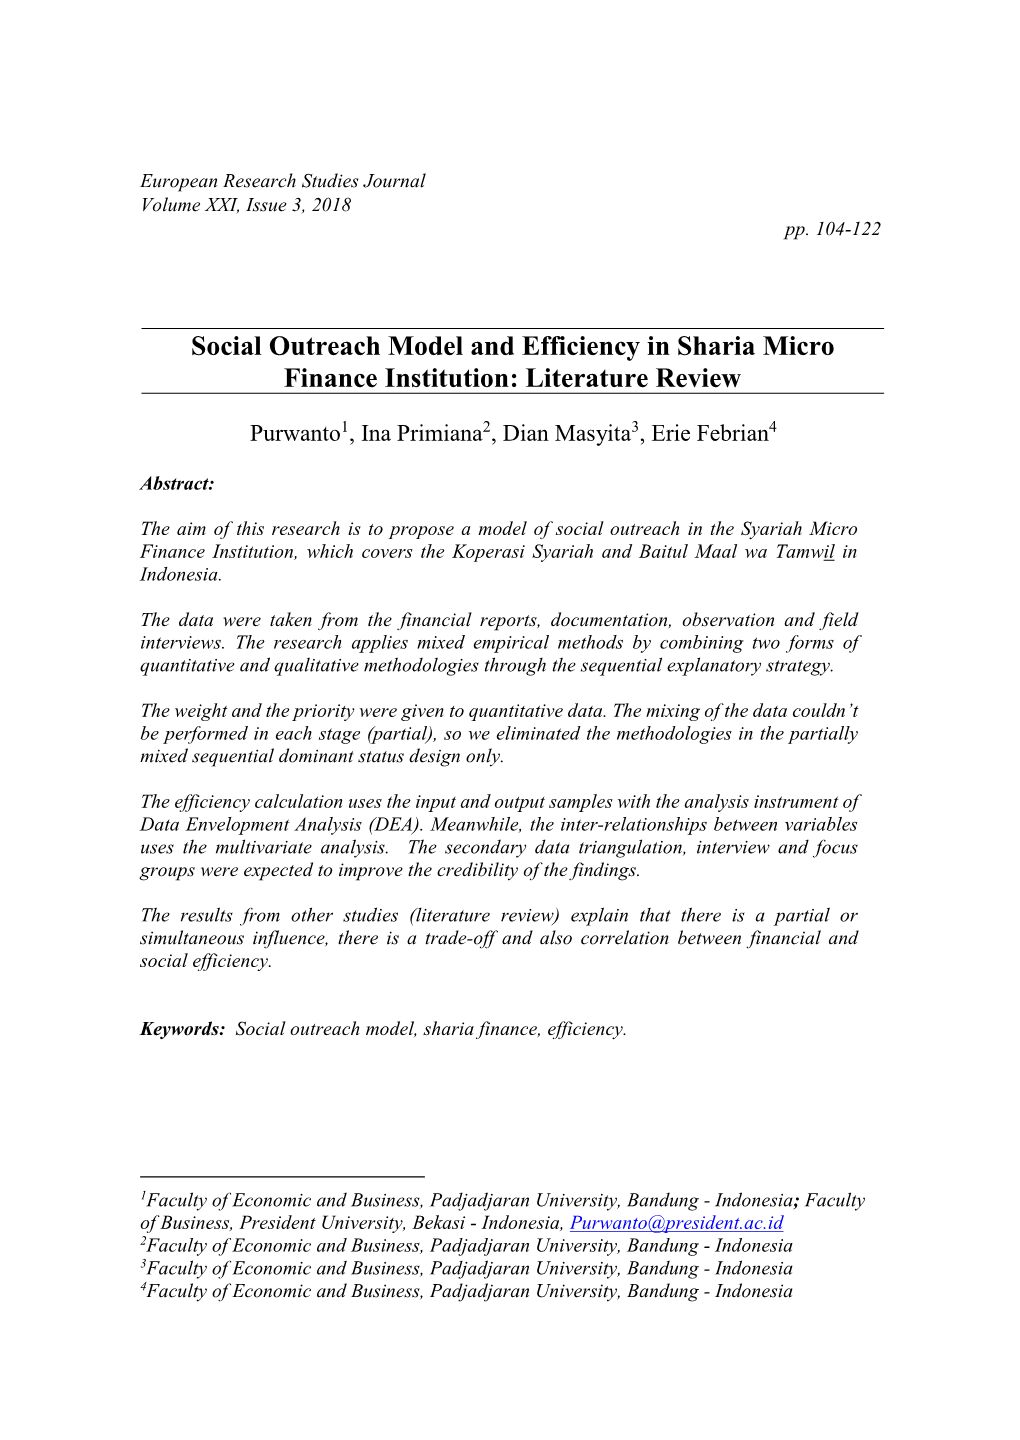 Social Outreach Model and Efficiency in Sharia Micro Finance Institution: Literature Review